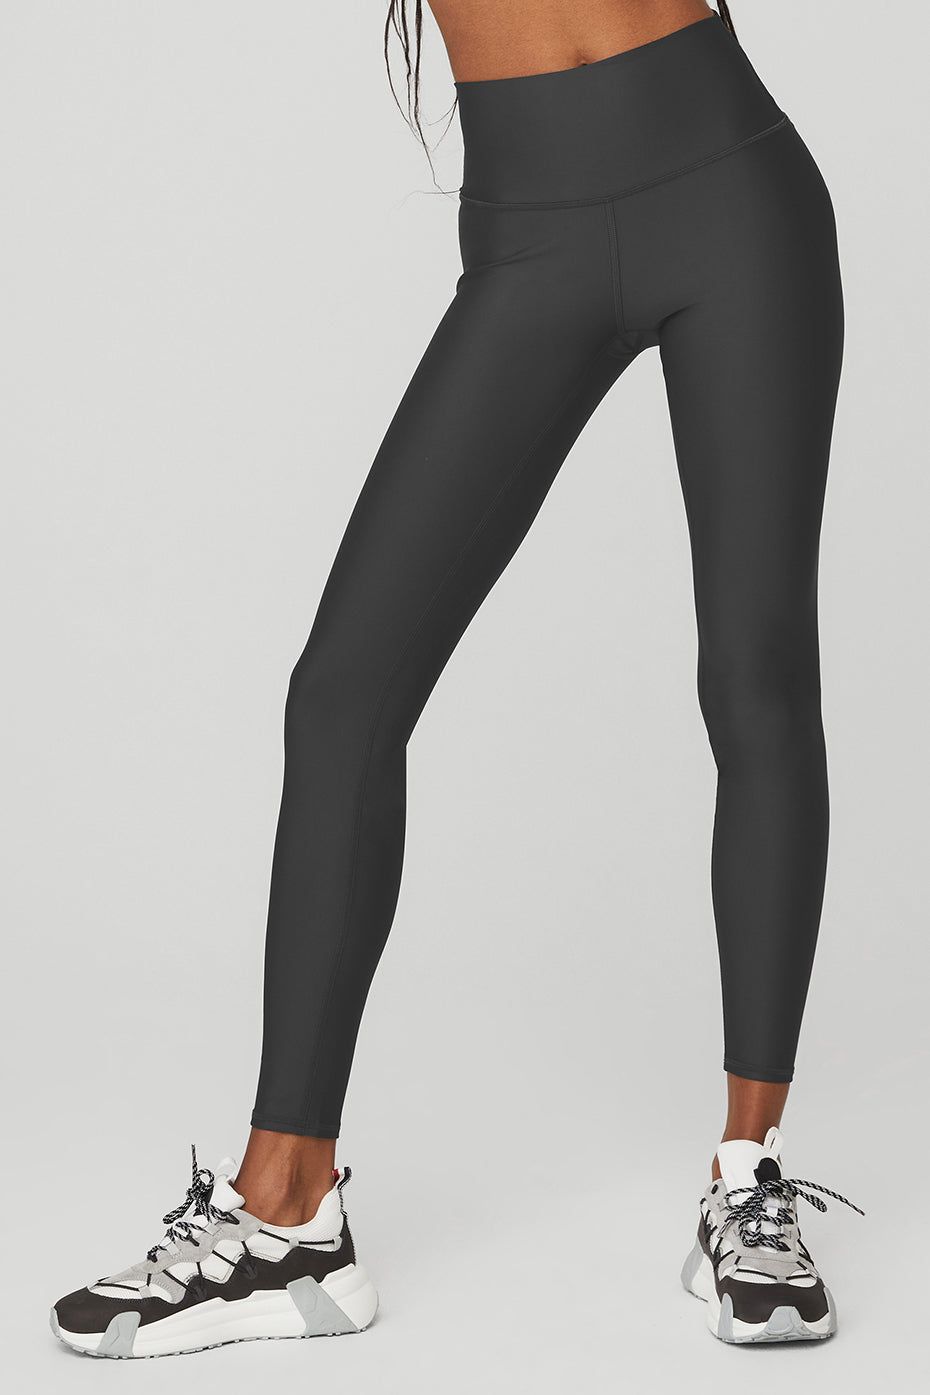 13 Best Drawstring Leggings For All Your Workouts